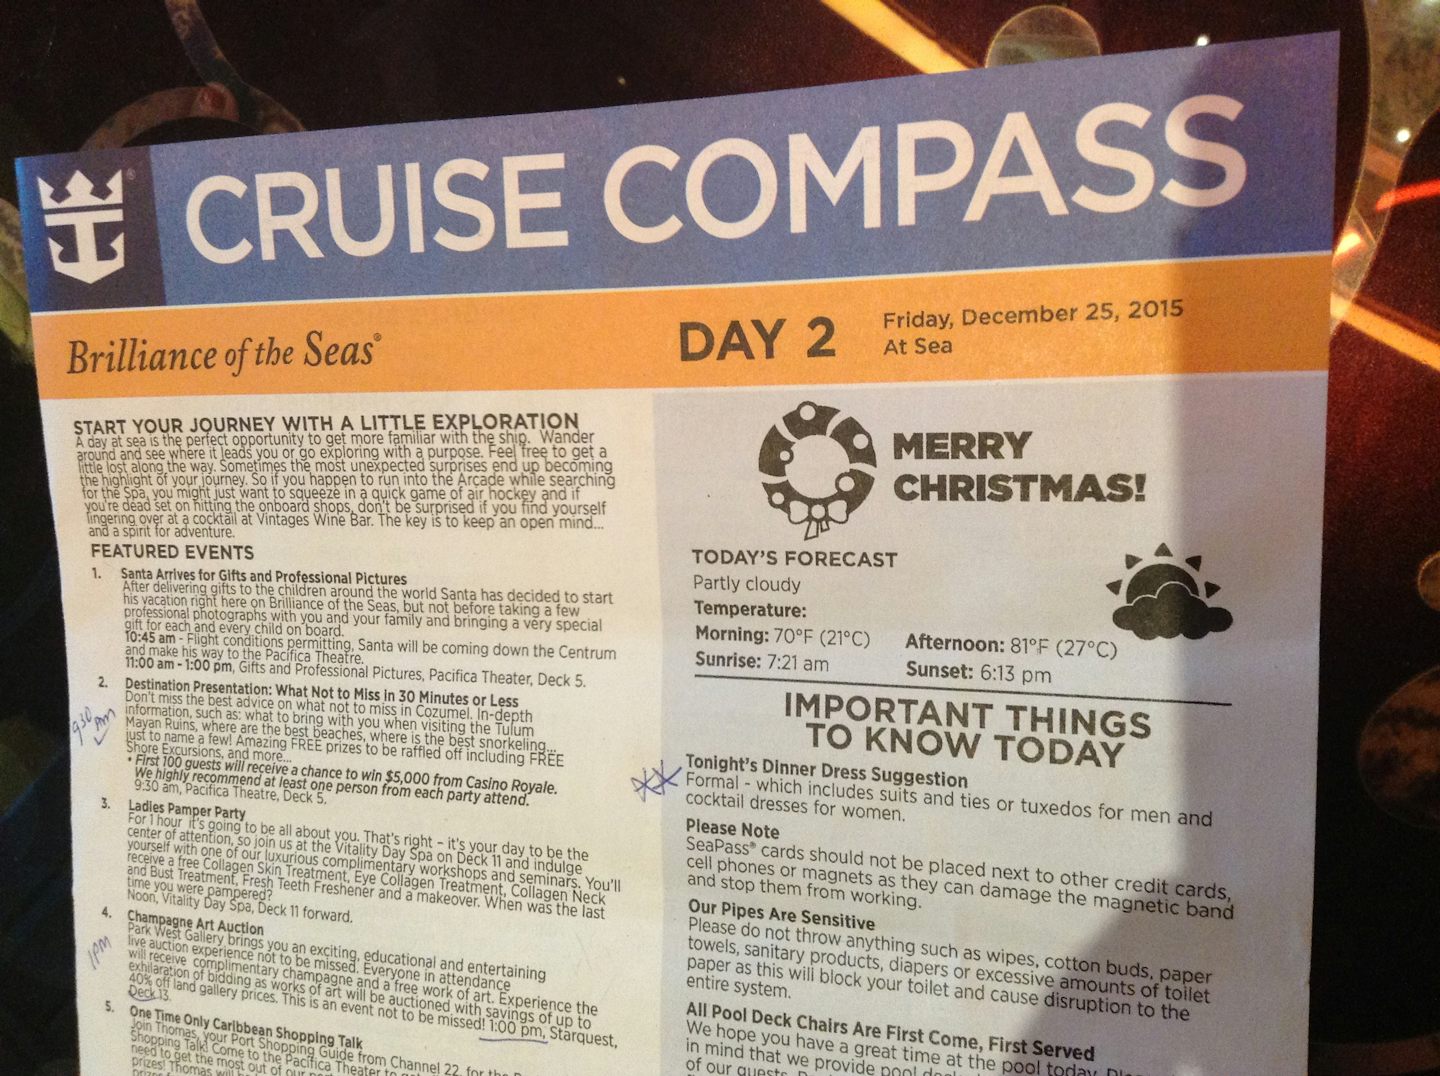 Cruise Compass is very Valuable and informative. A must read each day